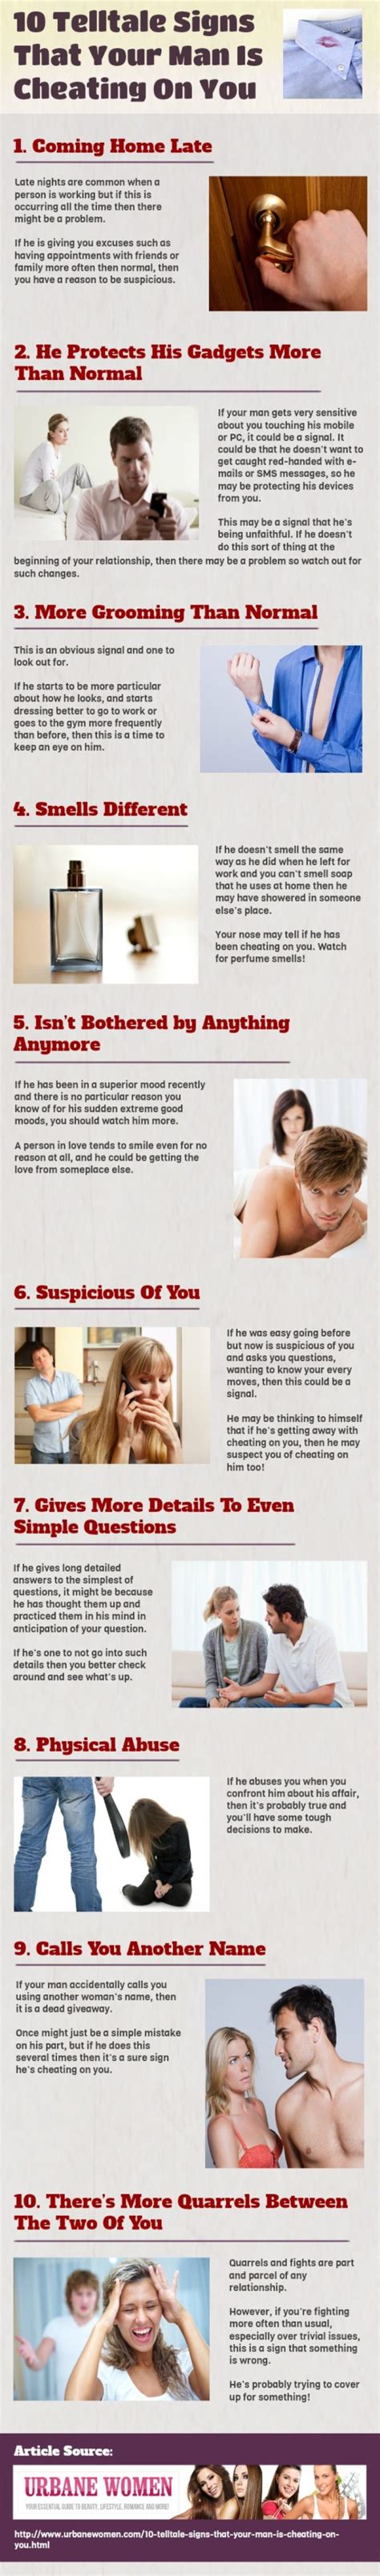 Psychology 10 Telltale Signs That Your Man Is Cheating On You